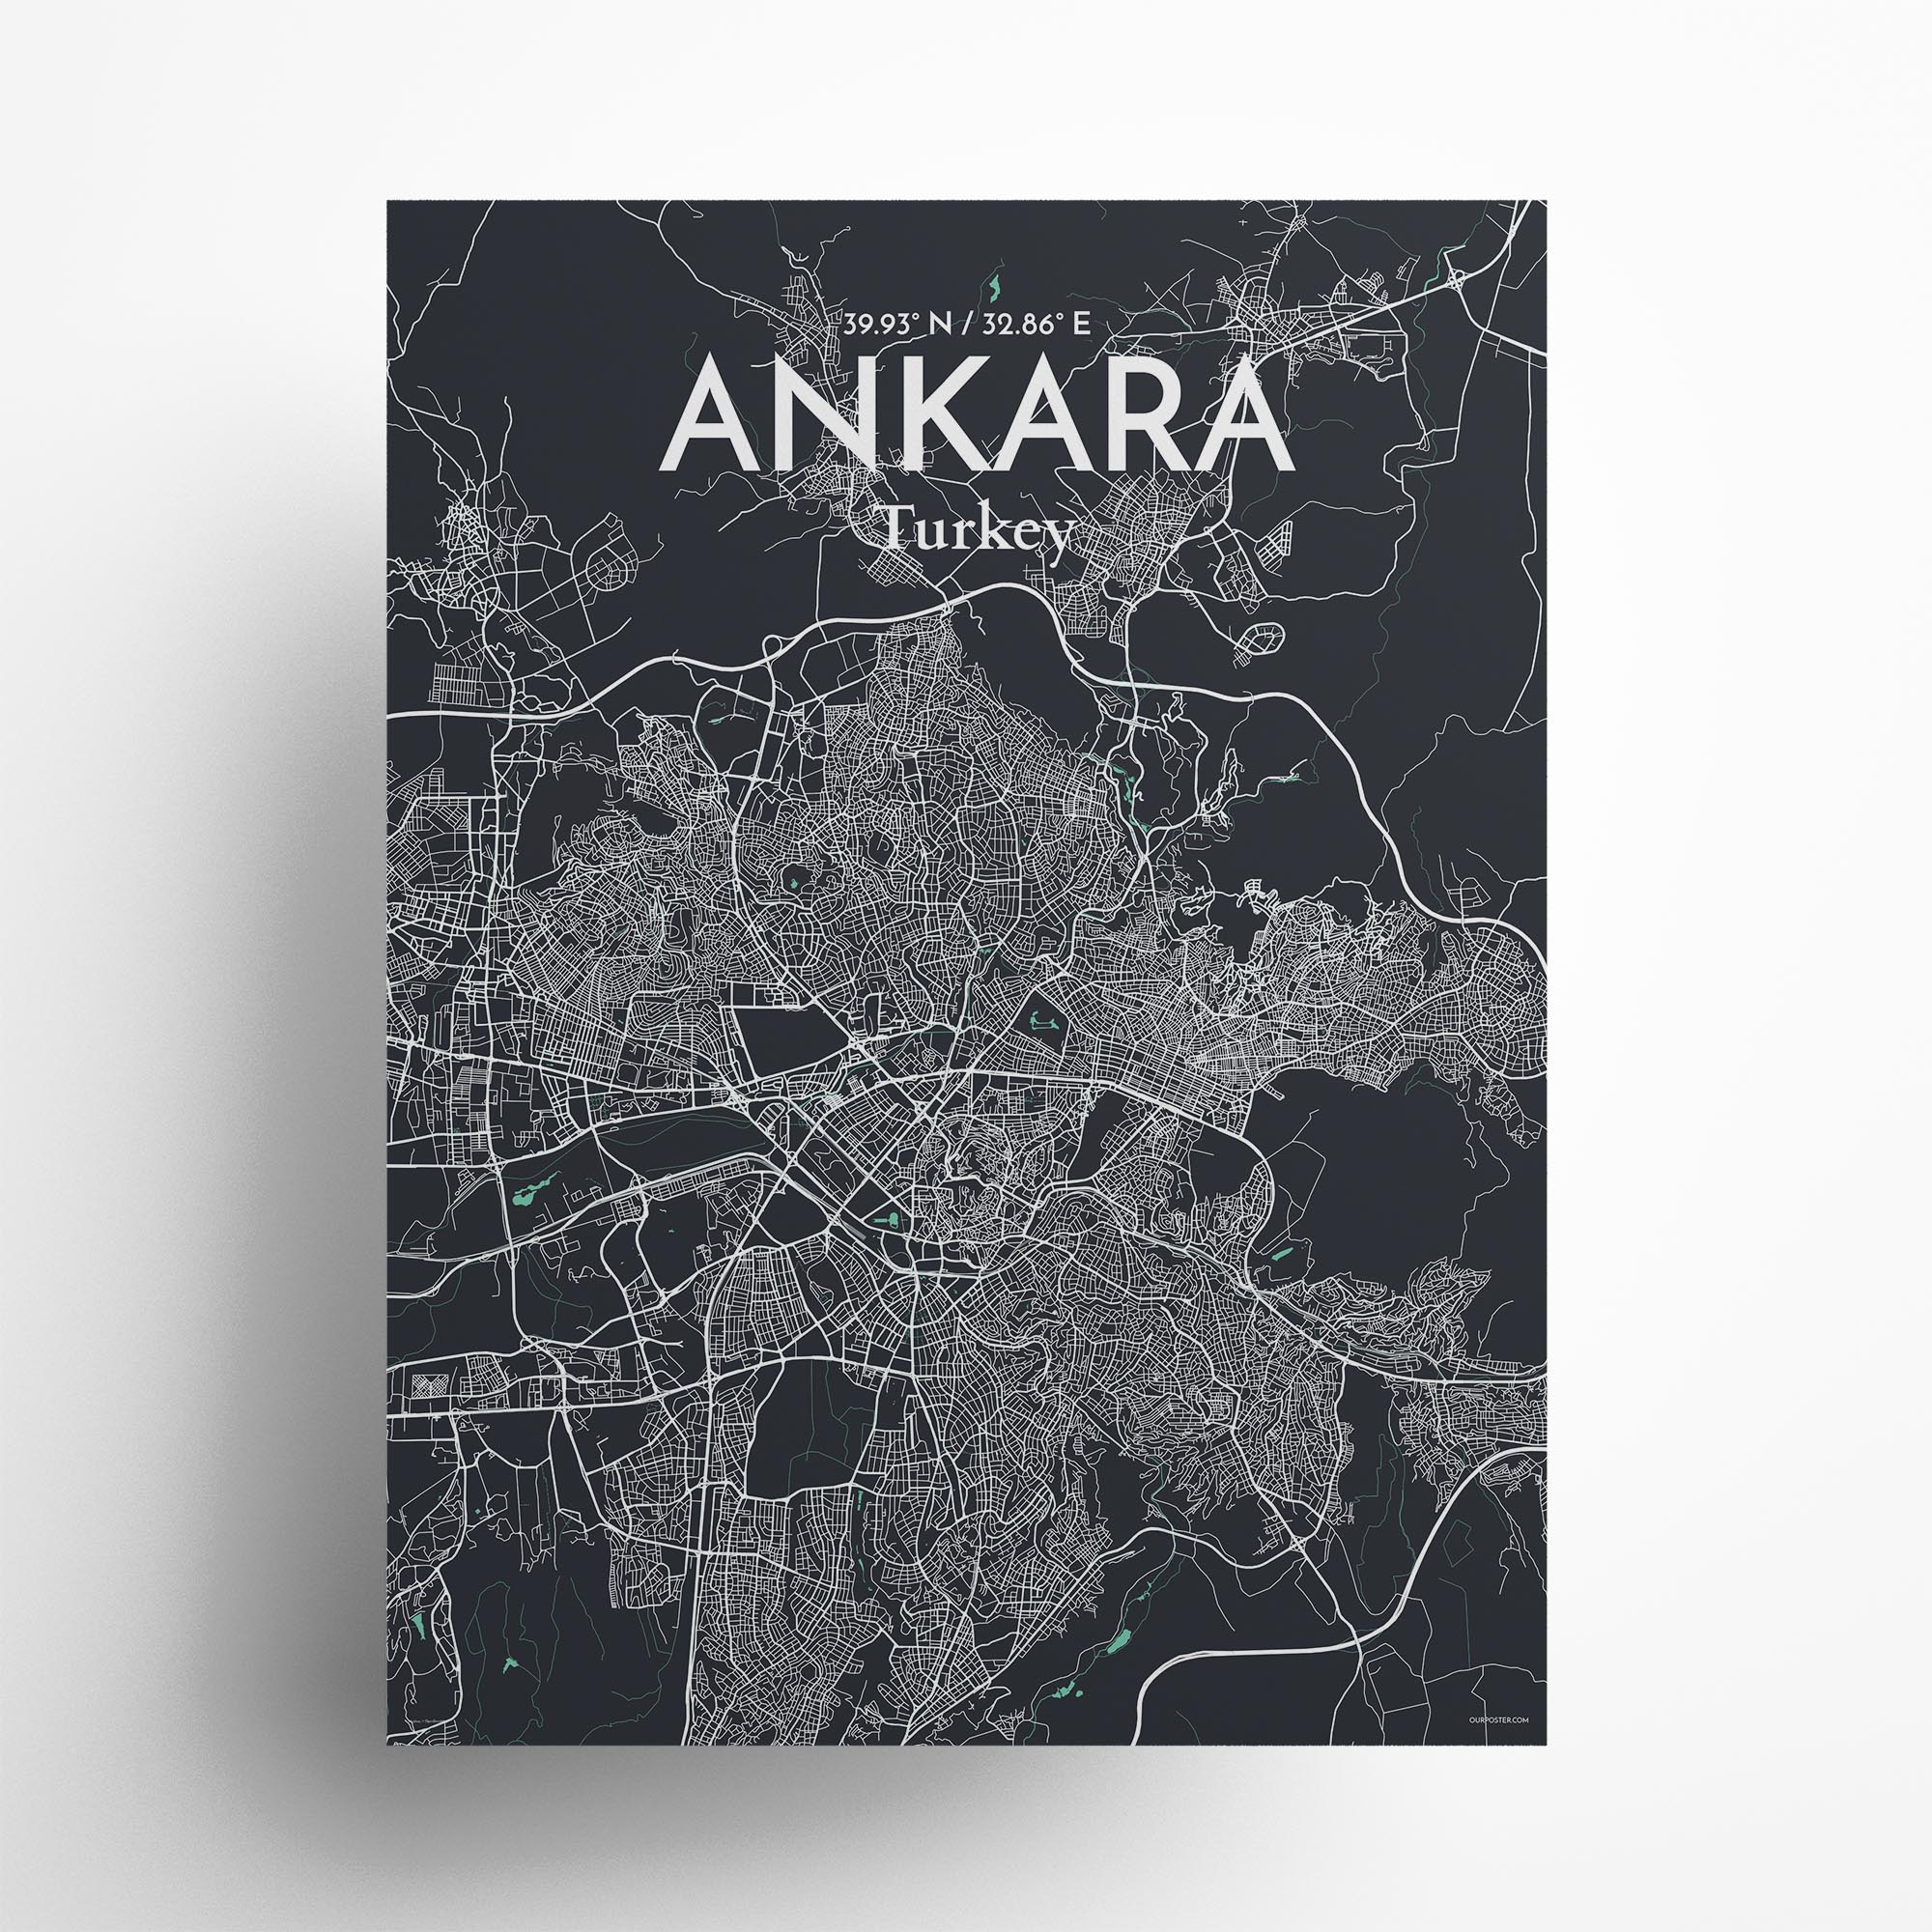 Ankara city map poster in Dream of size 18" x 24"